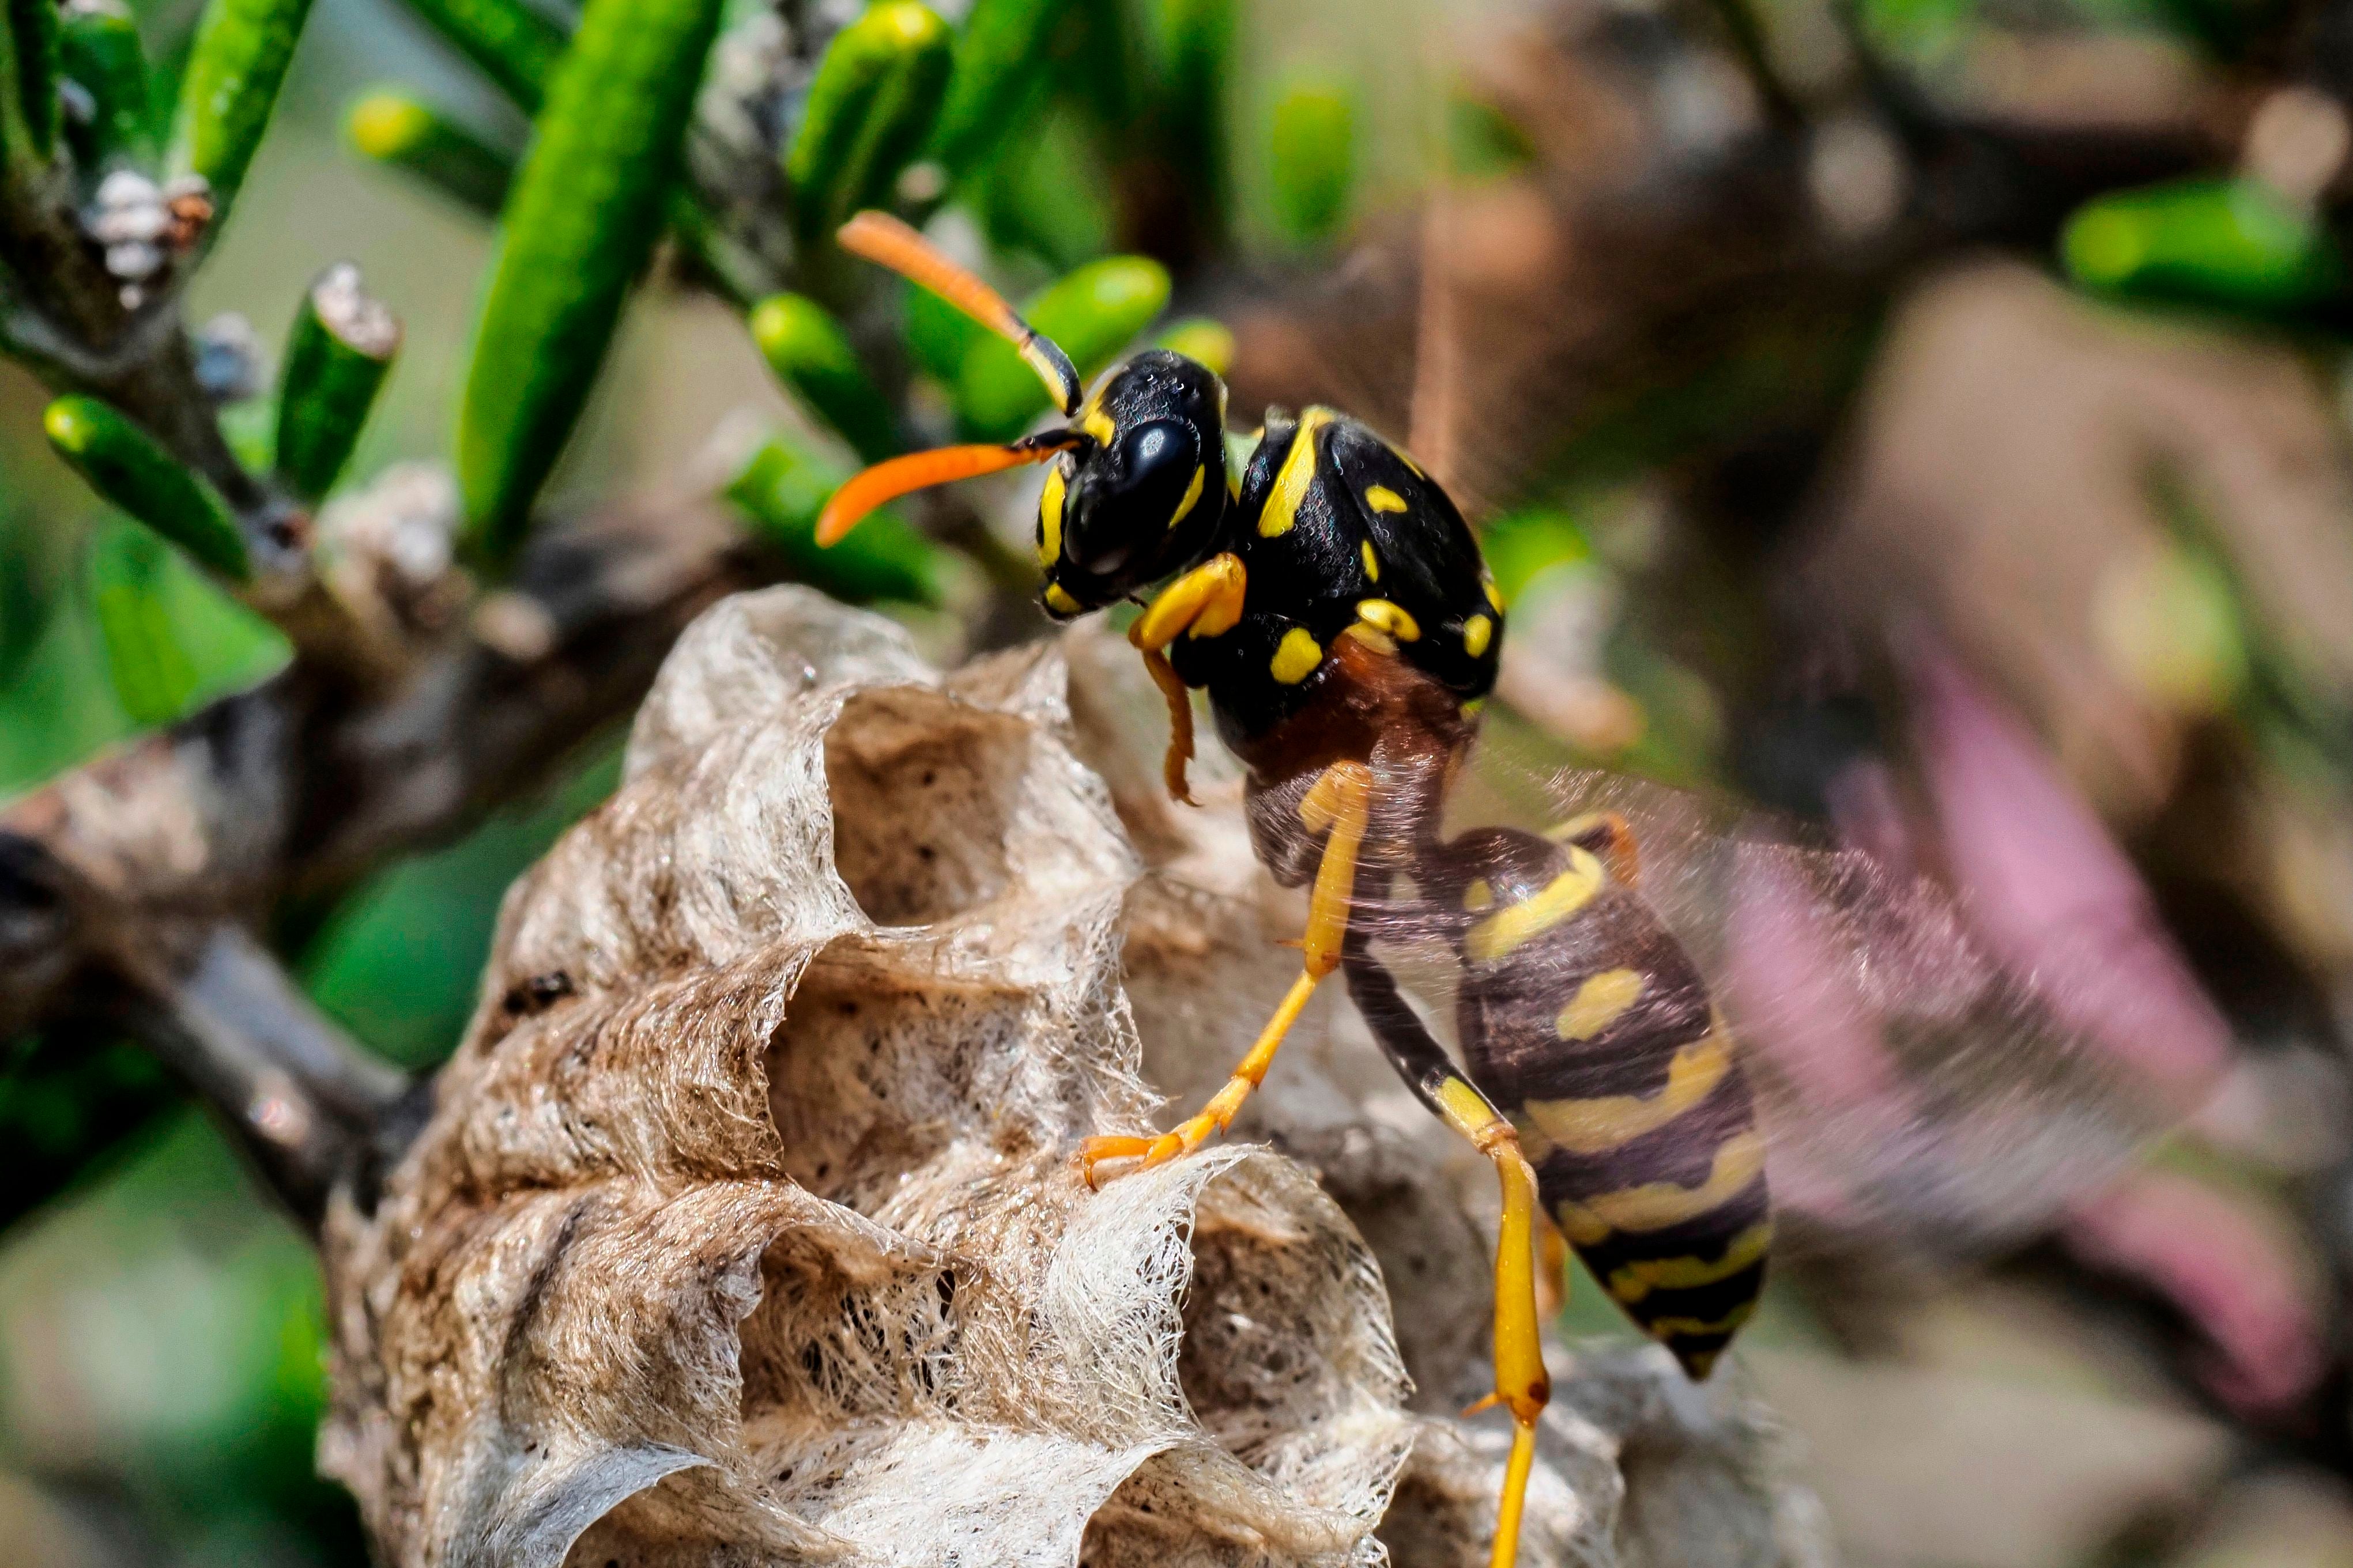 Why should we care about wasps?